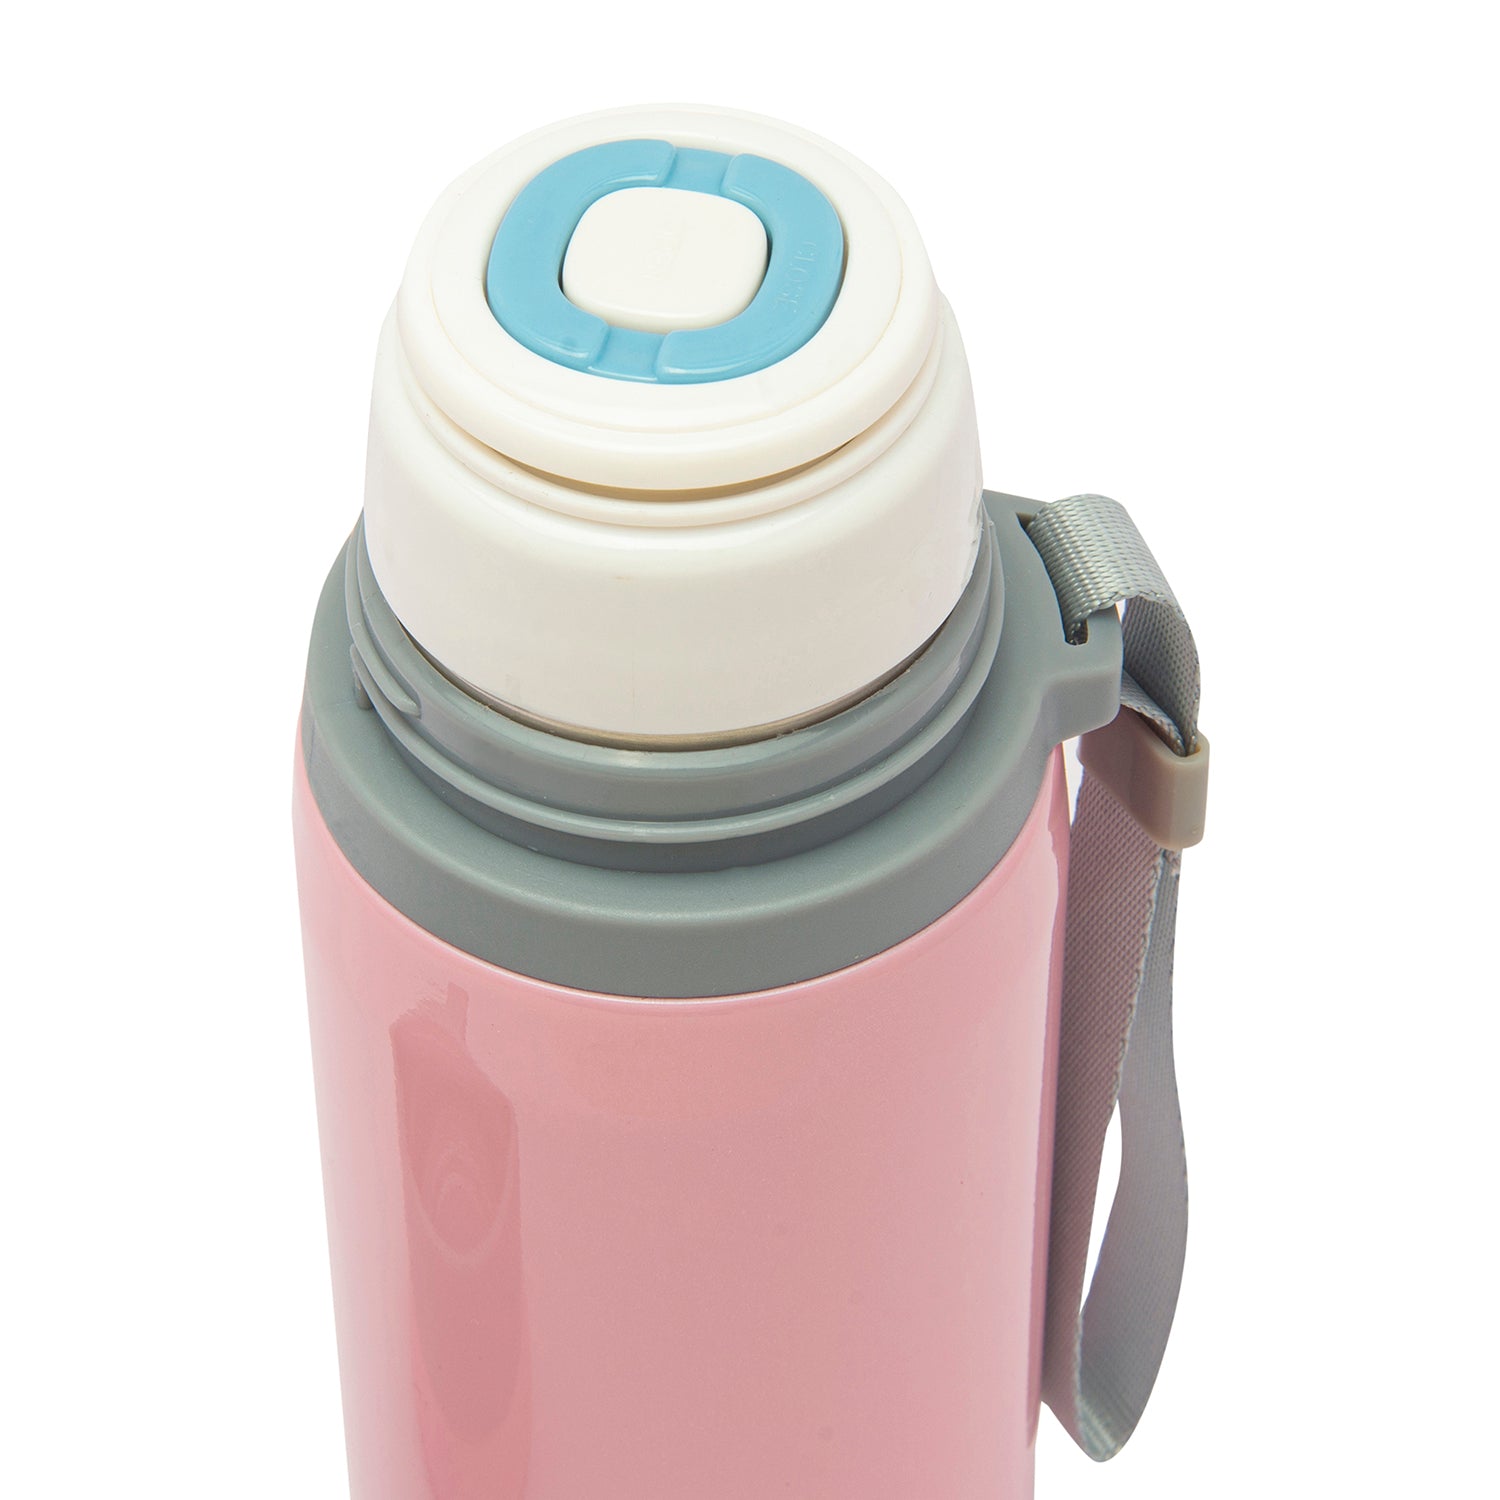 Solid Pink 350 ml Stainless Steel Flask - Baby Moo